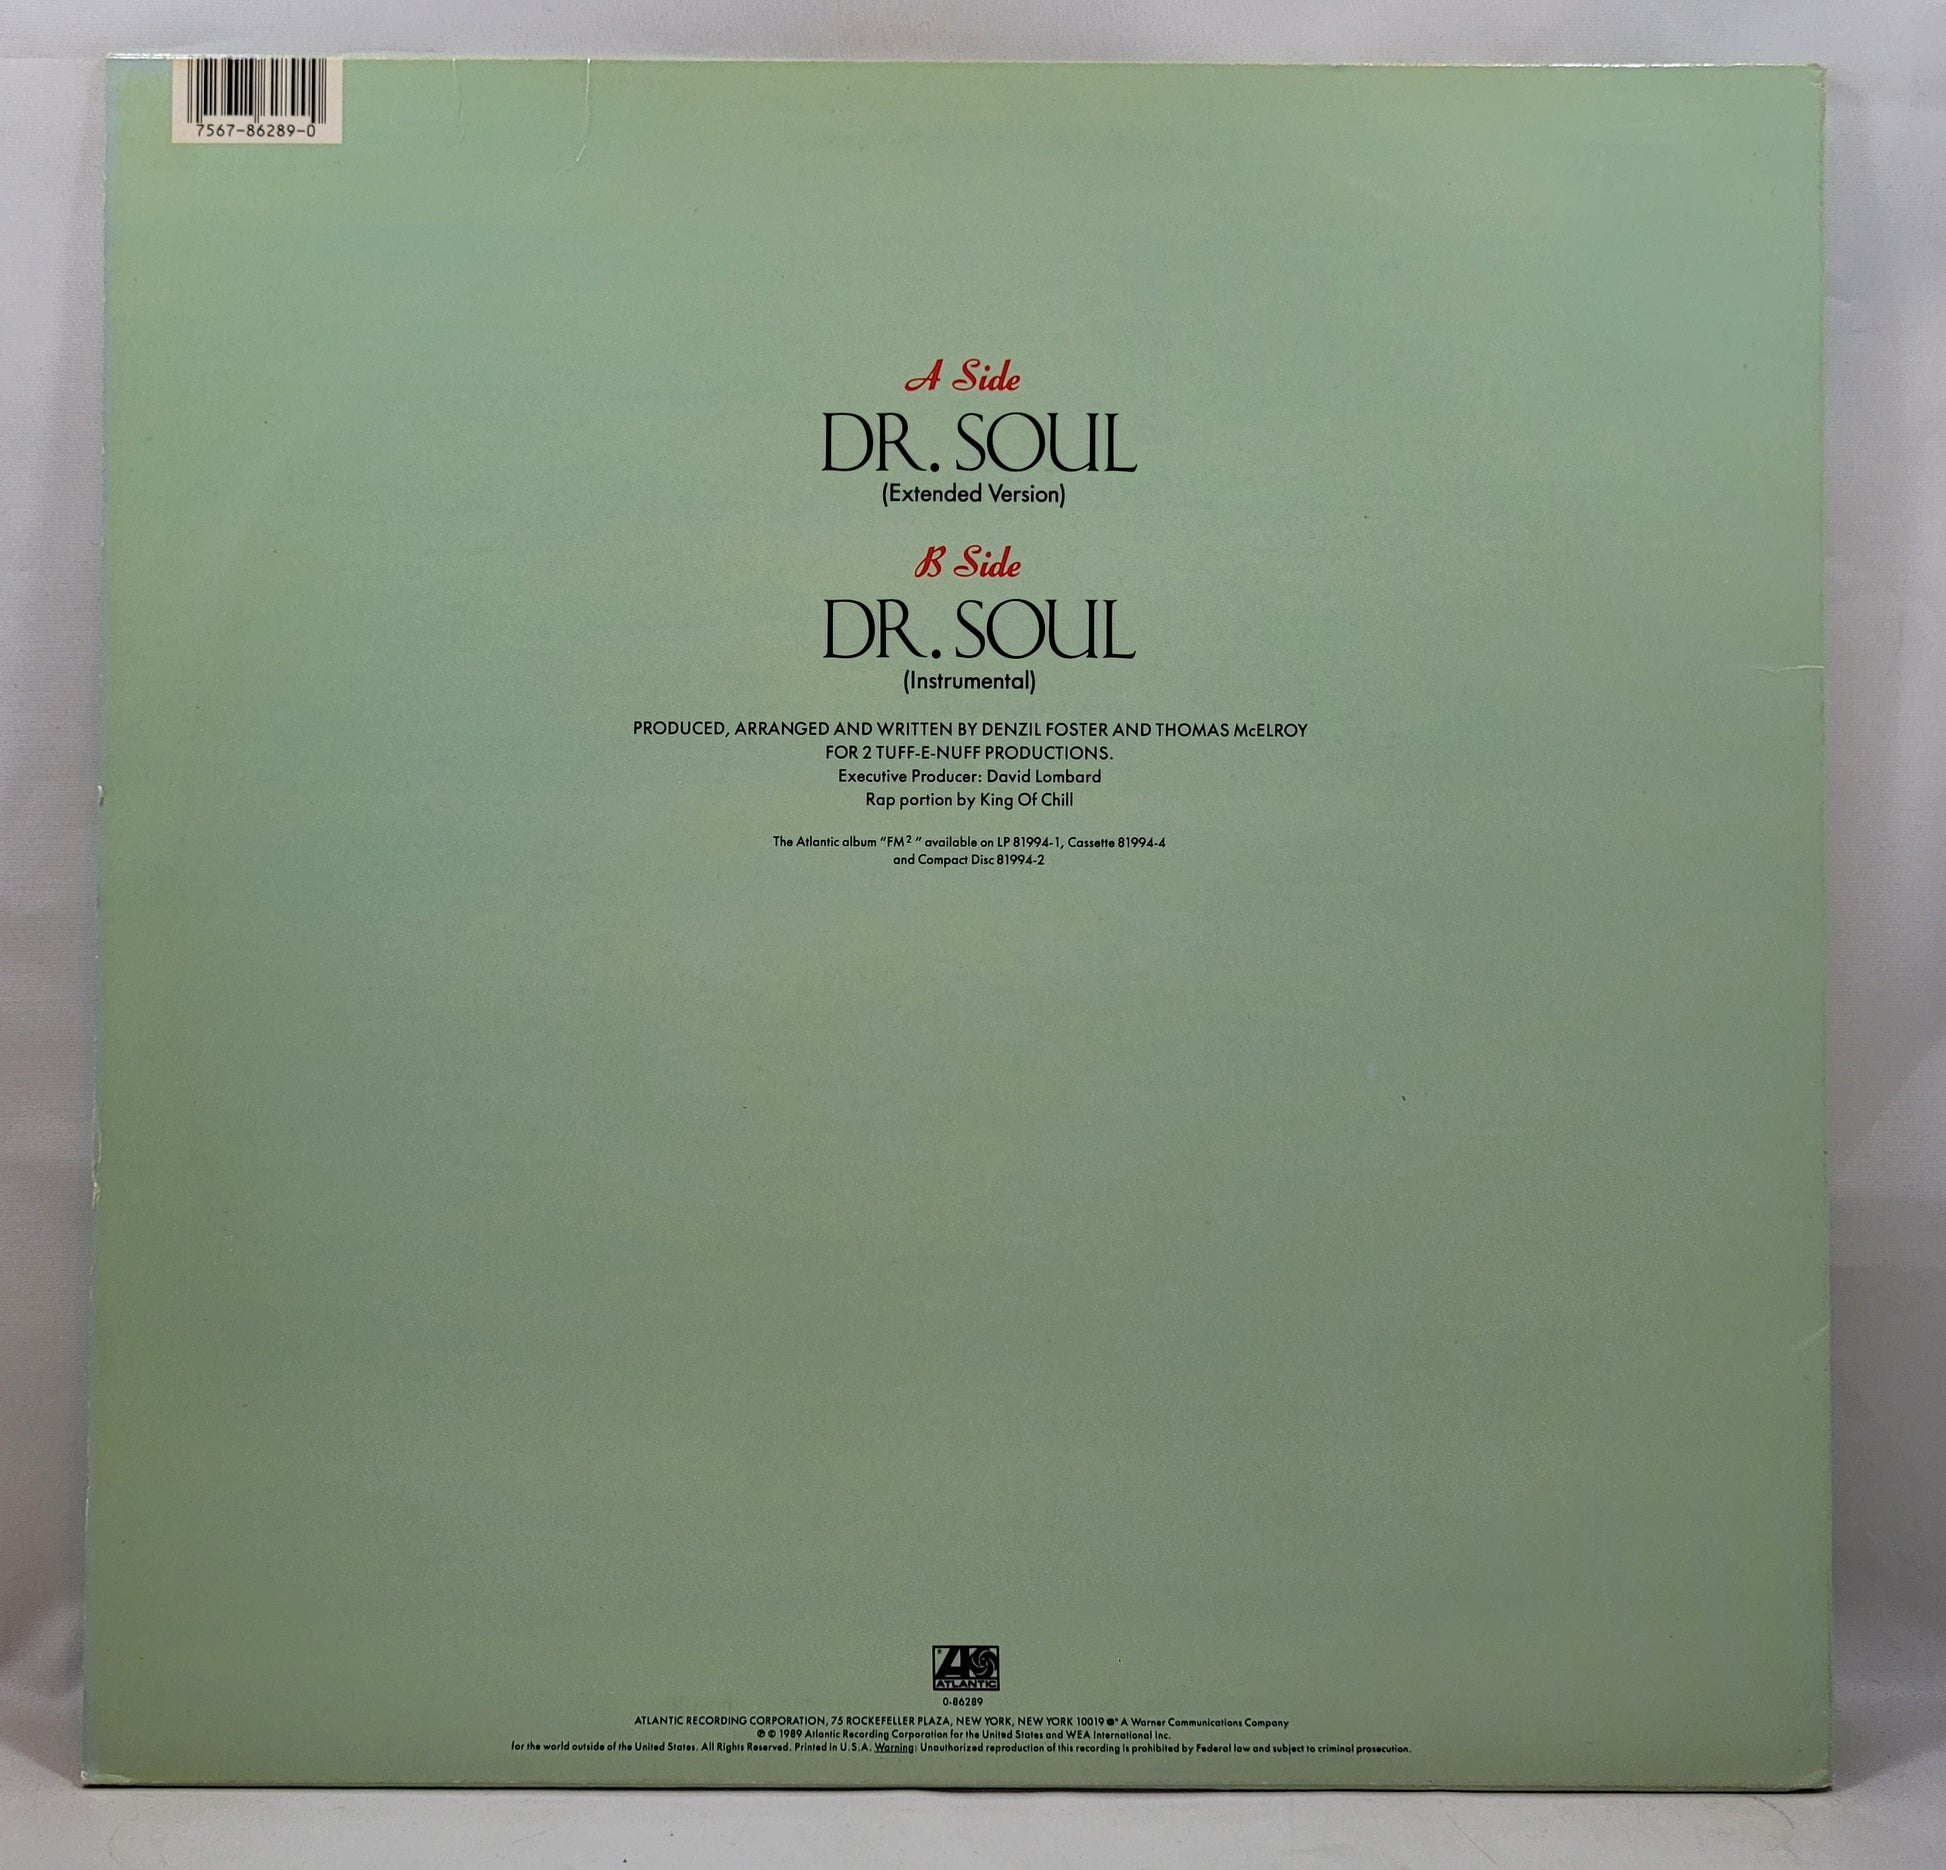 Foster / McElroy - Dr. Soul [1989 Used Vinyl Record 12" Single]